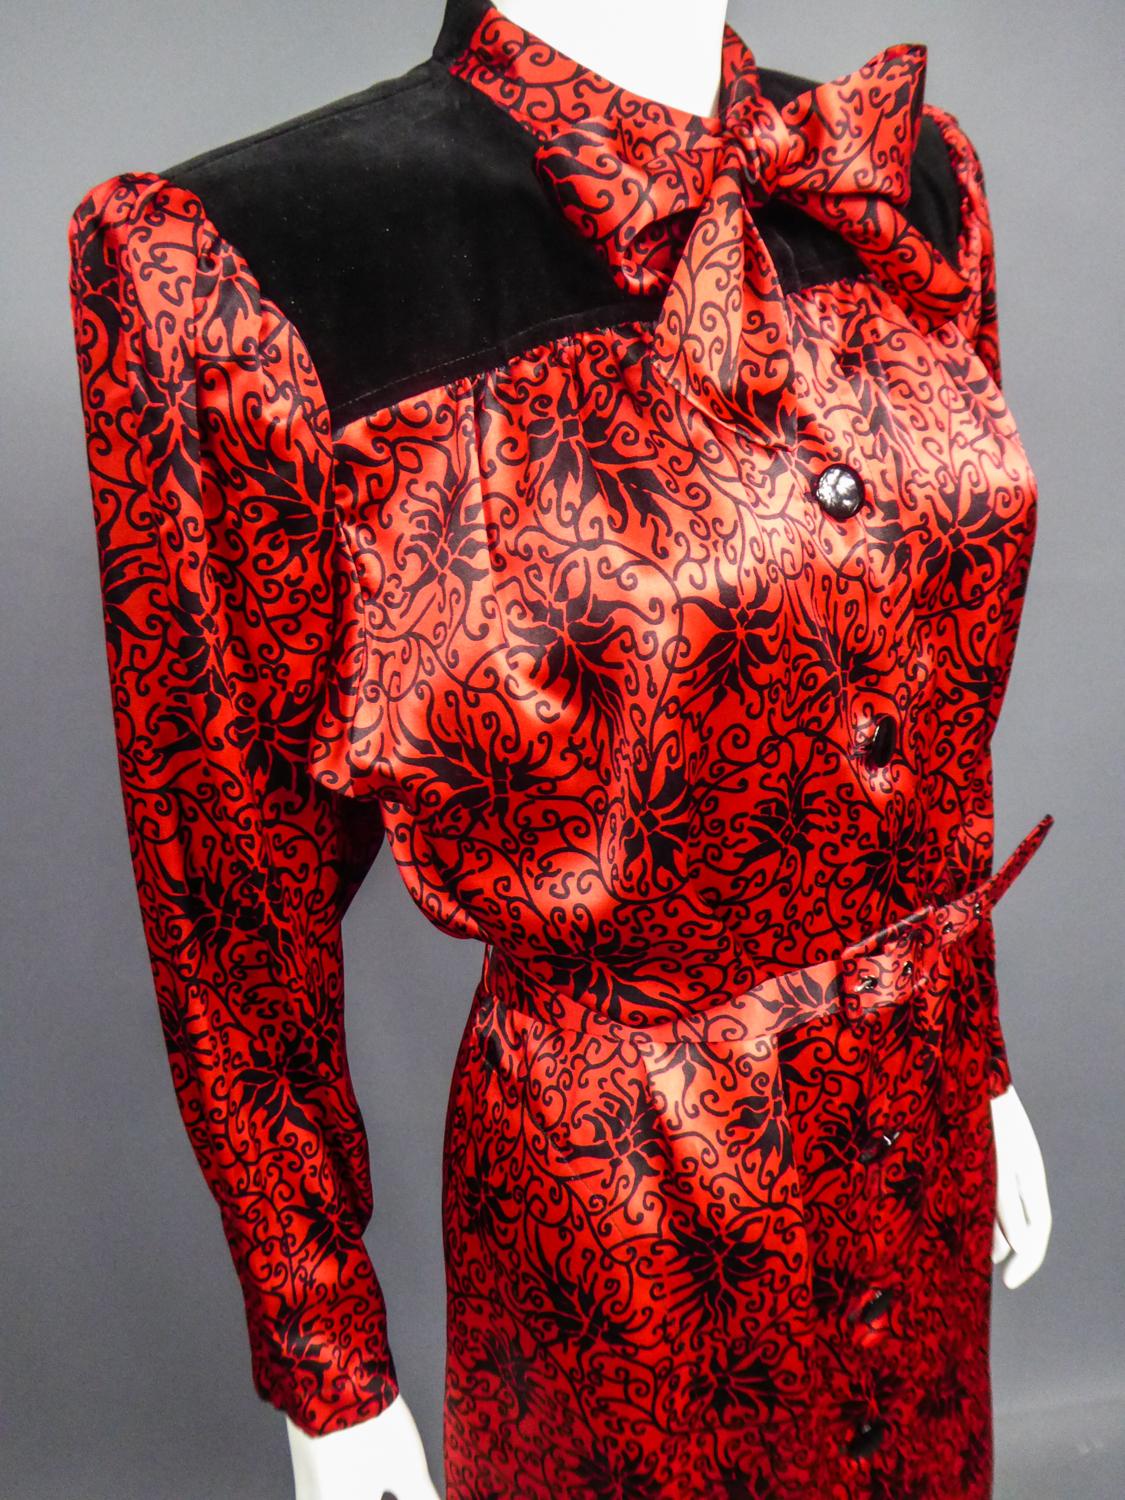 Yves Saint Laurent Variation Blouse Dress in Printed Satin Circa 1990 For Sale 10